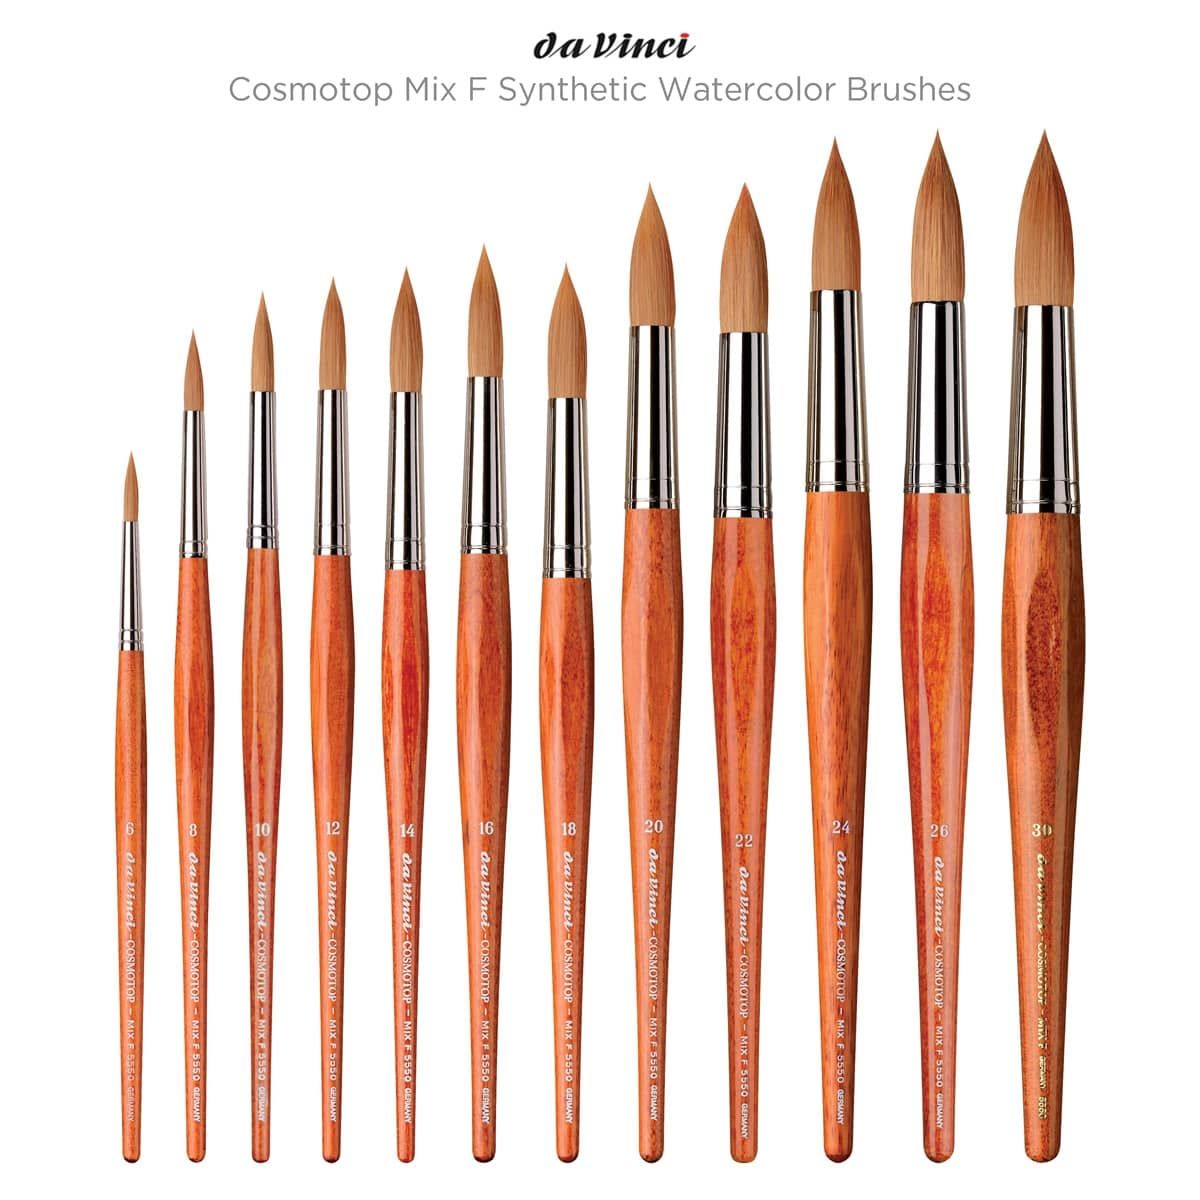 Da Vinci Cosmotop Mix F Synthetic Watercolor Brushes